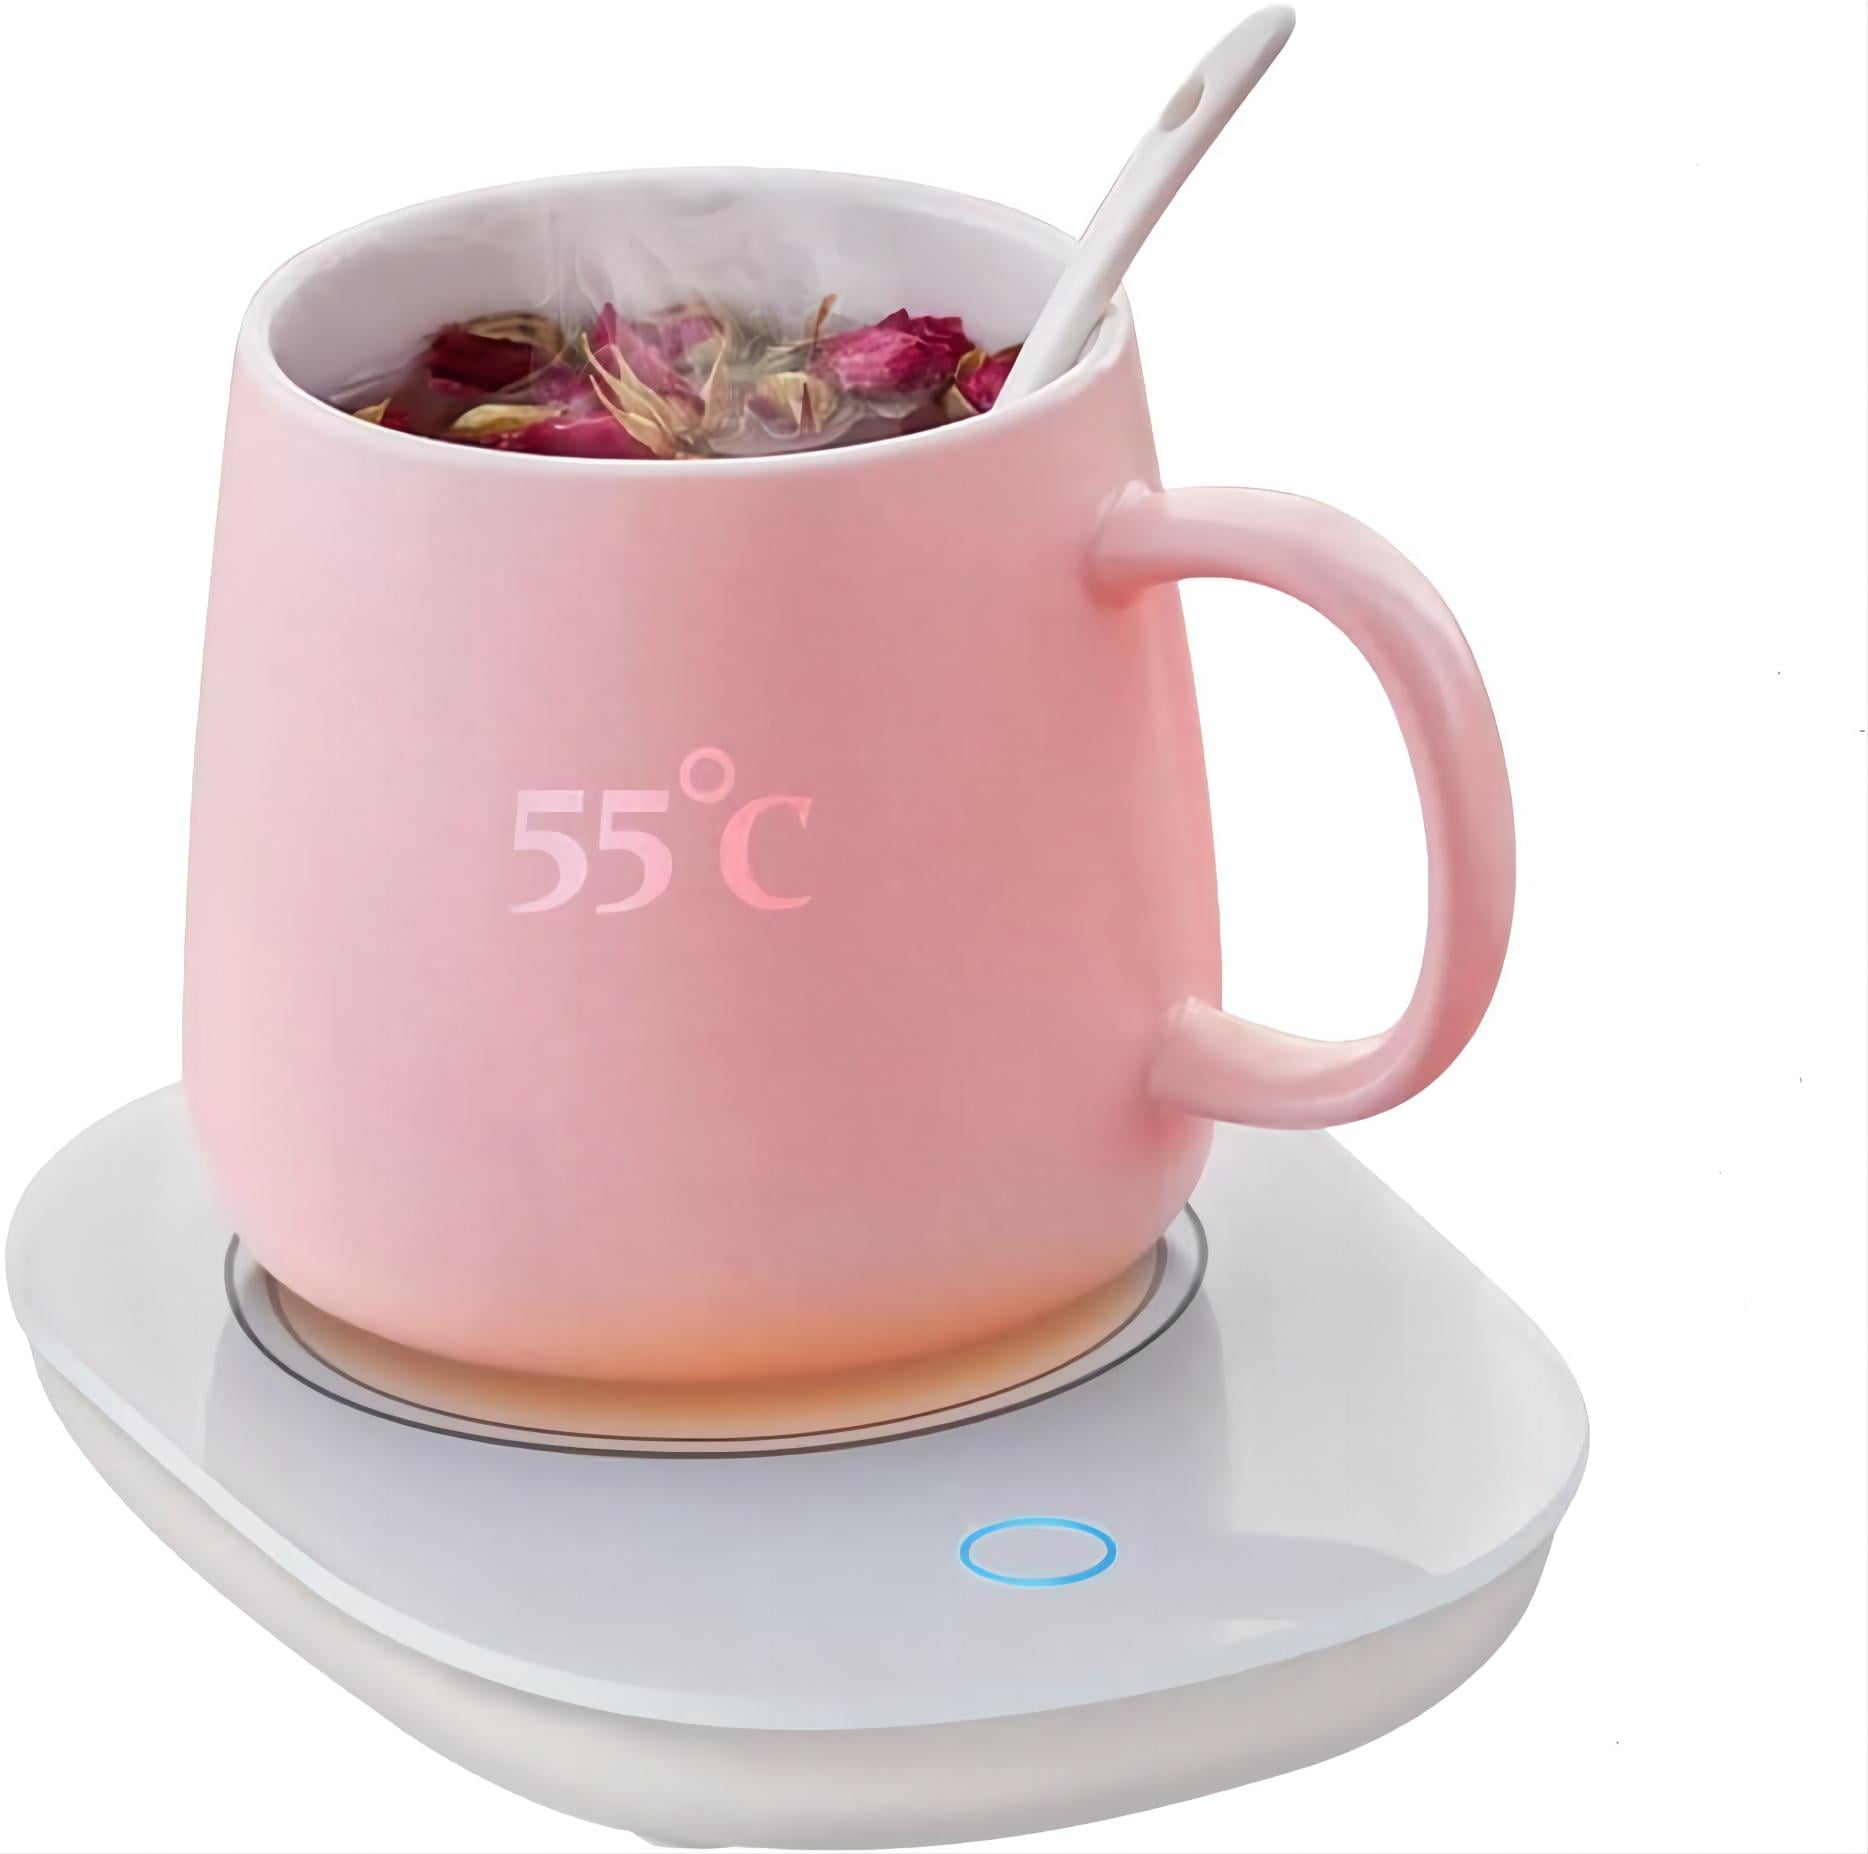 YEVIOR Coffee Cup Warmer for Desk With Intelligent Gravity Sensing